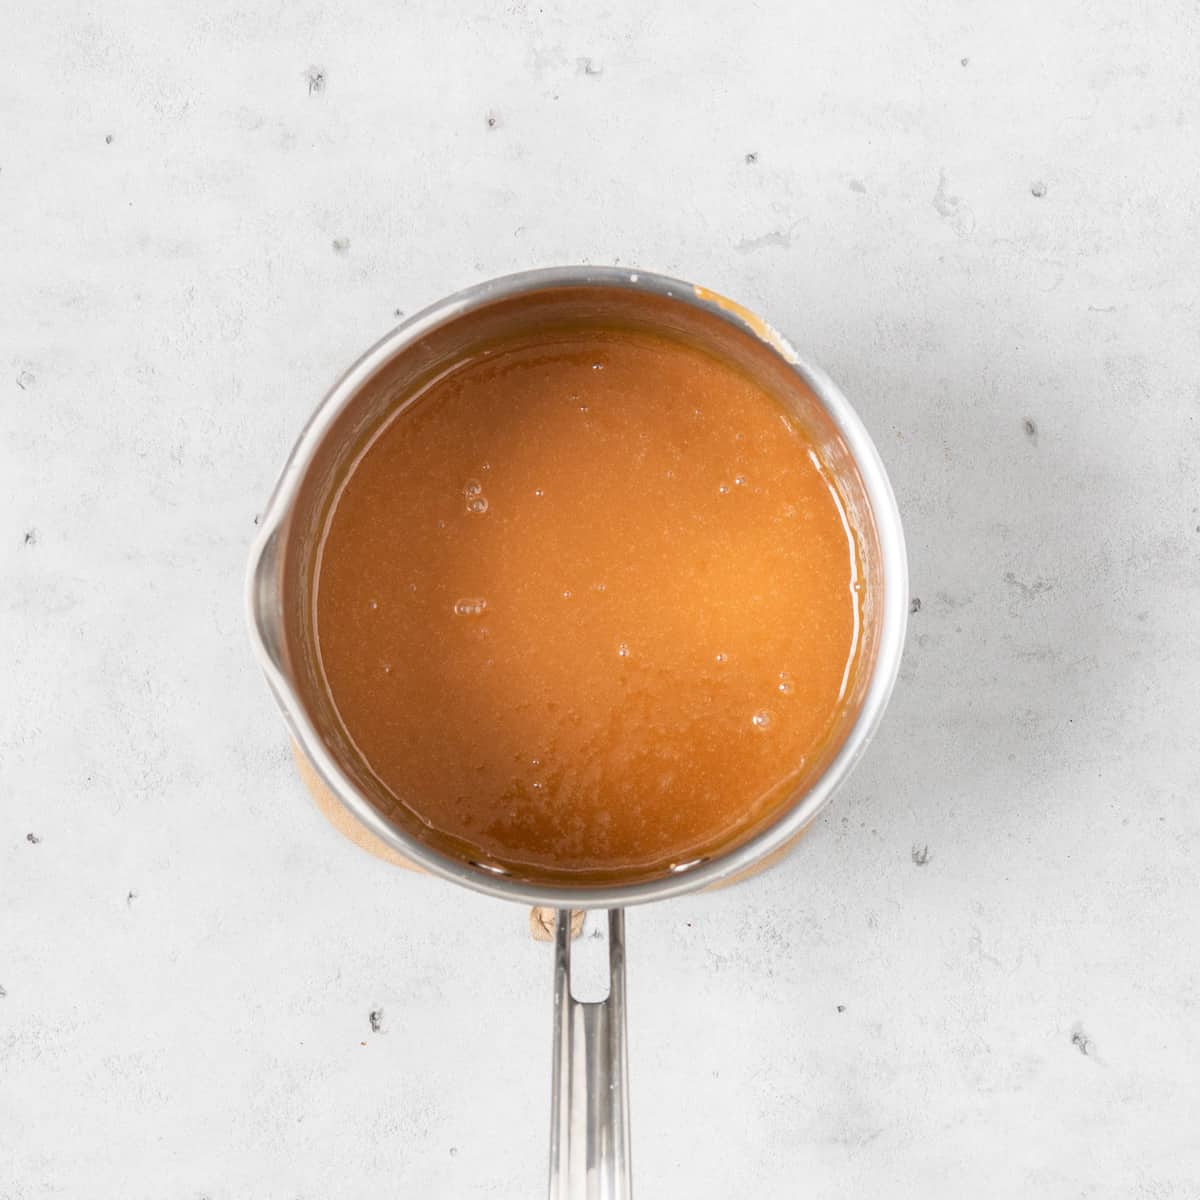 the caramel in a saucepan on a grey background.